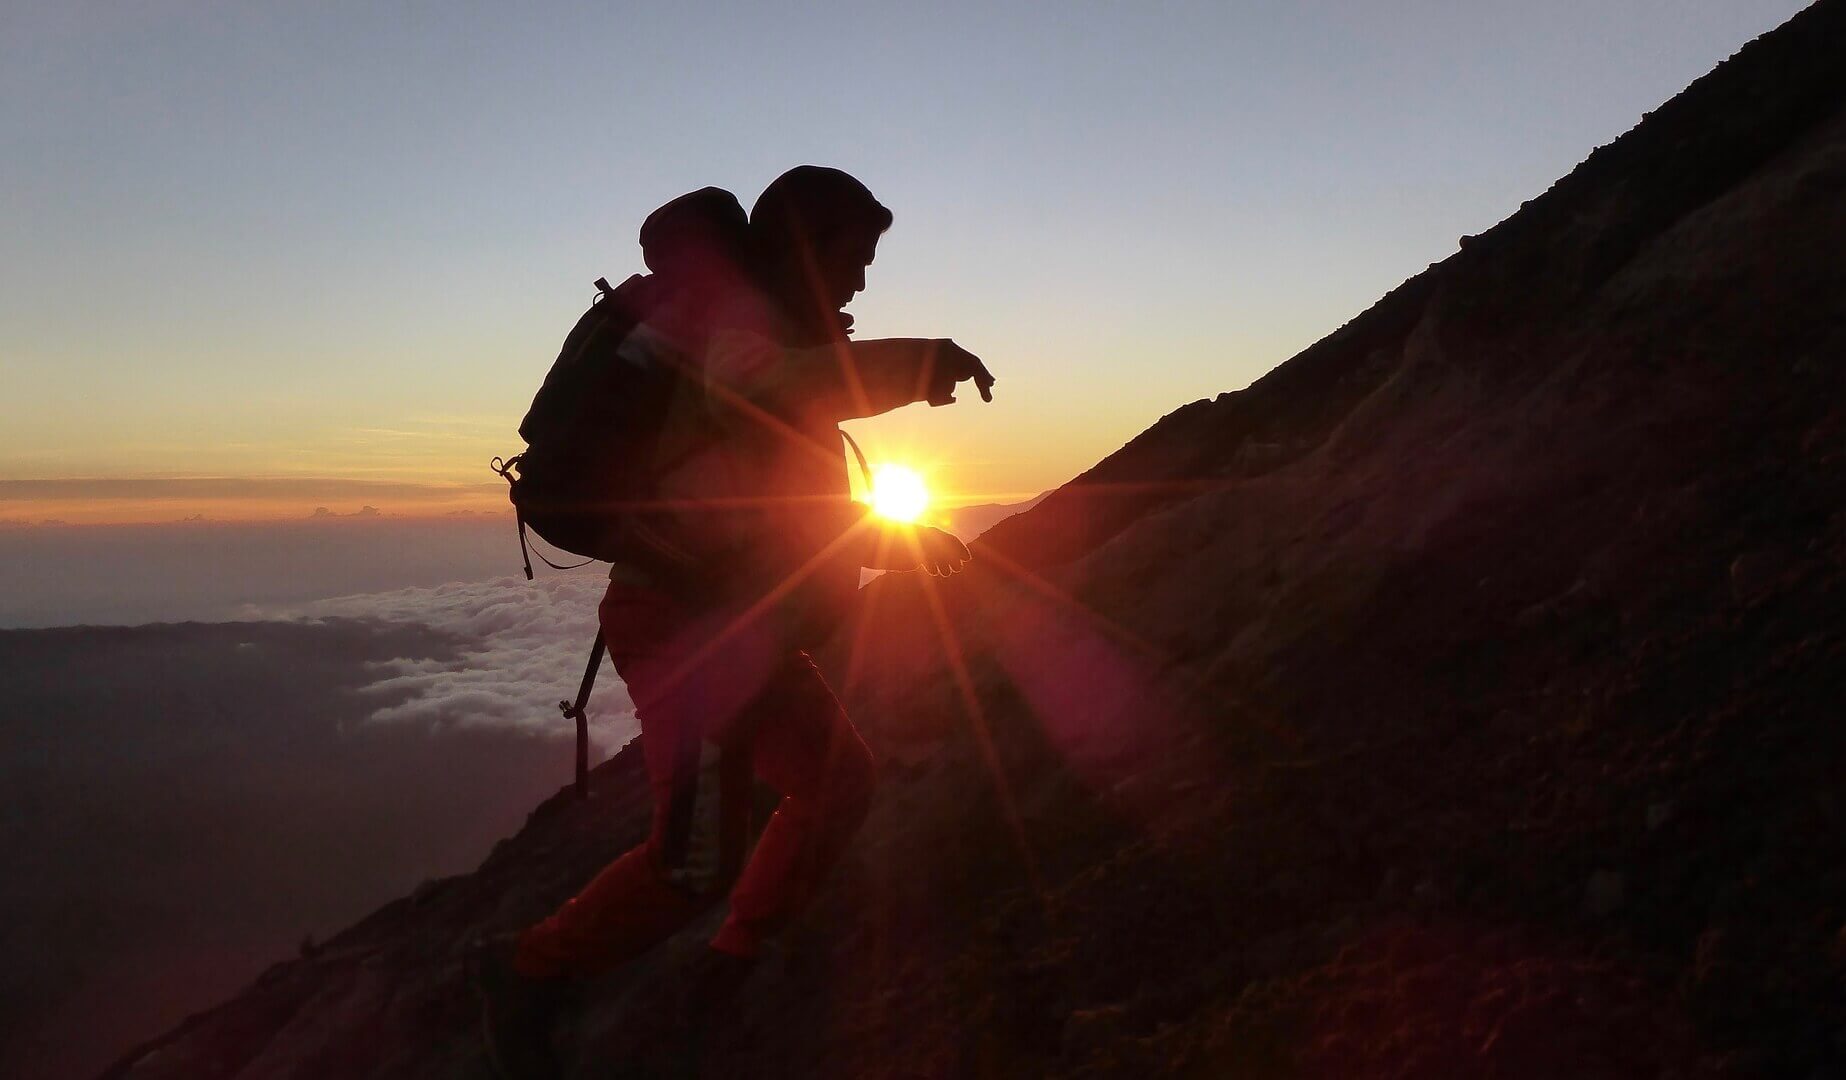 A guy hiking a mountain in sunset